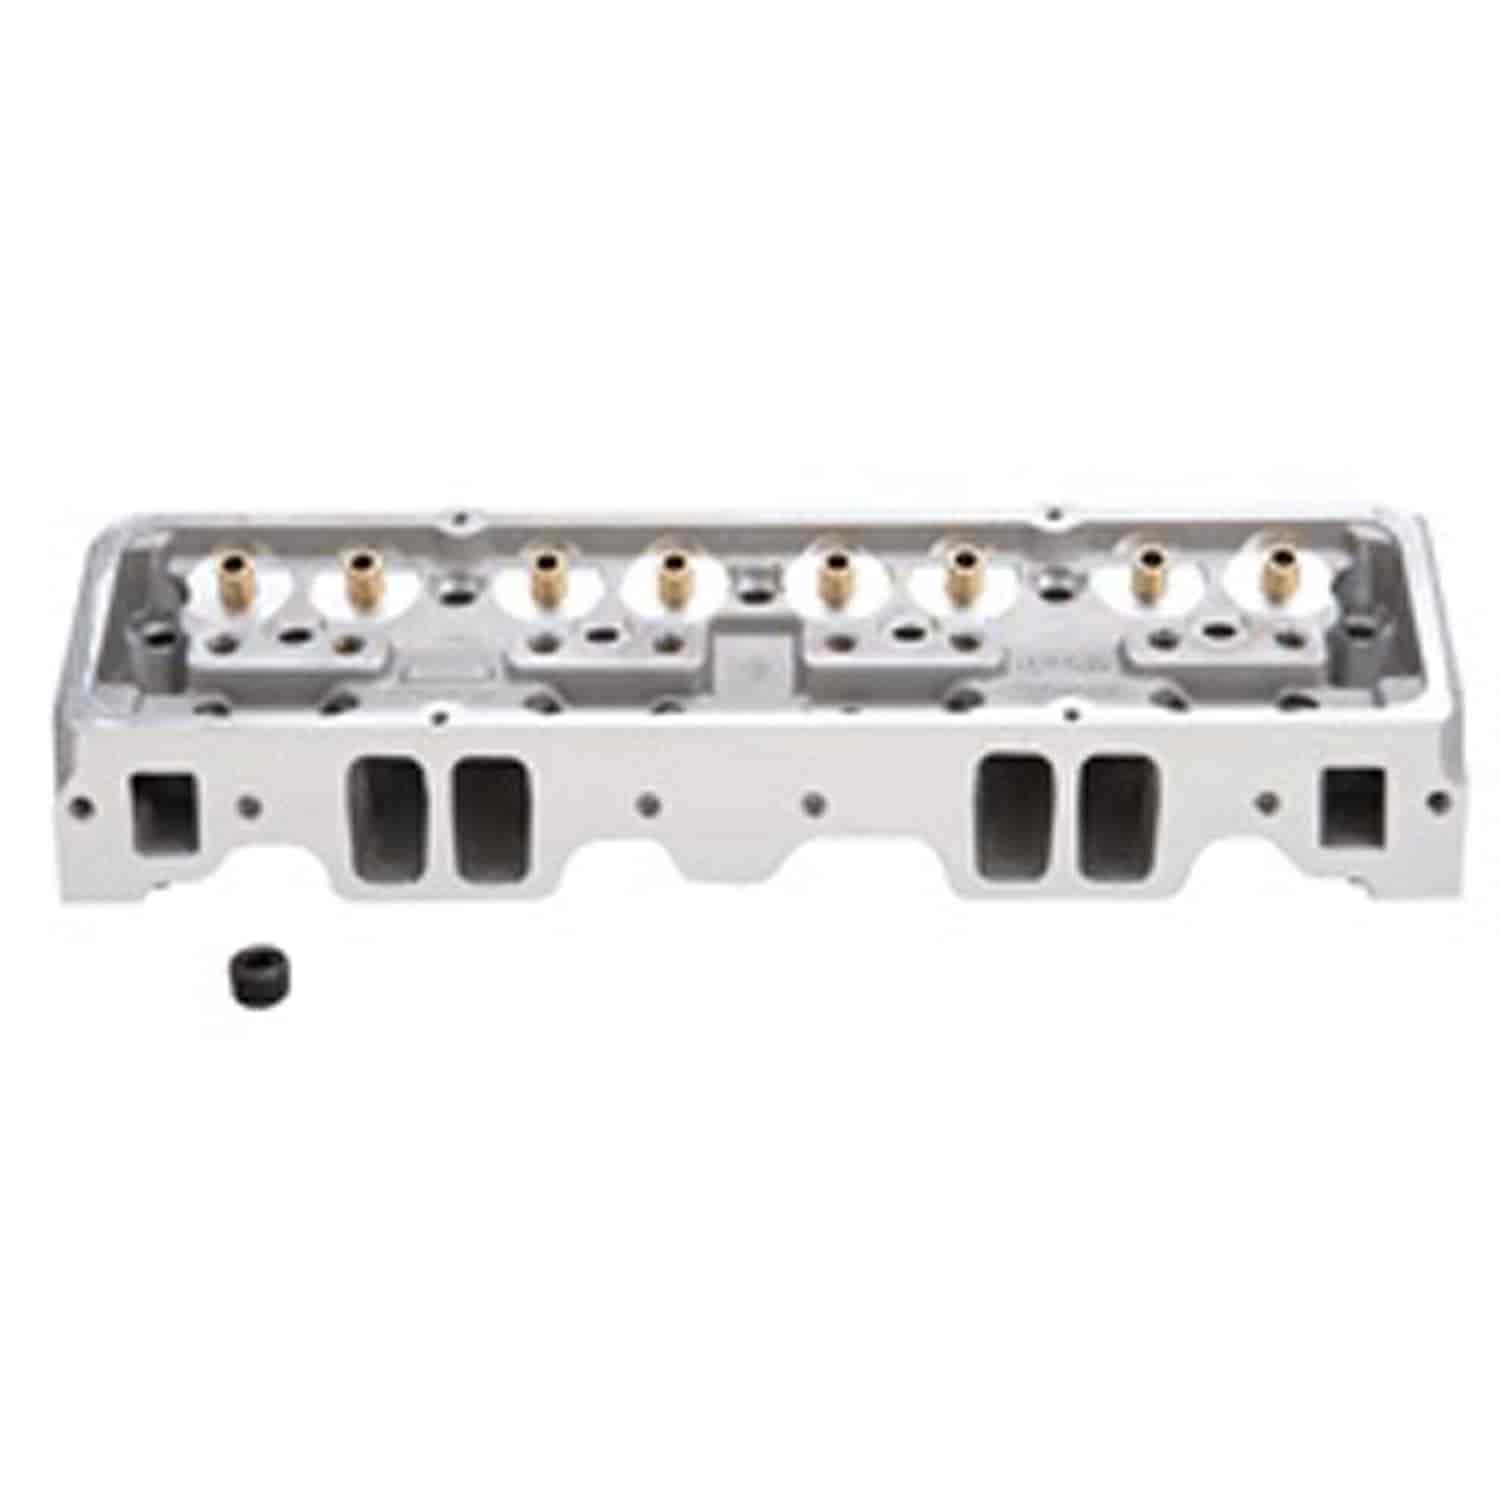 NHRA Perfromer RPM Cylinder Heads for Small Block Chevy